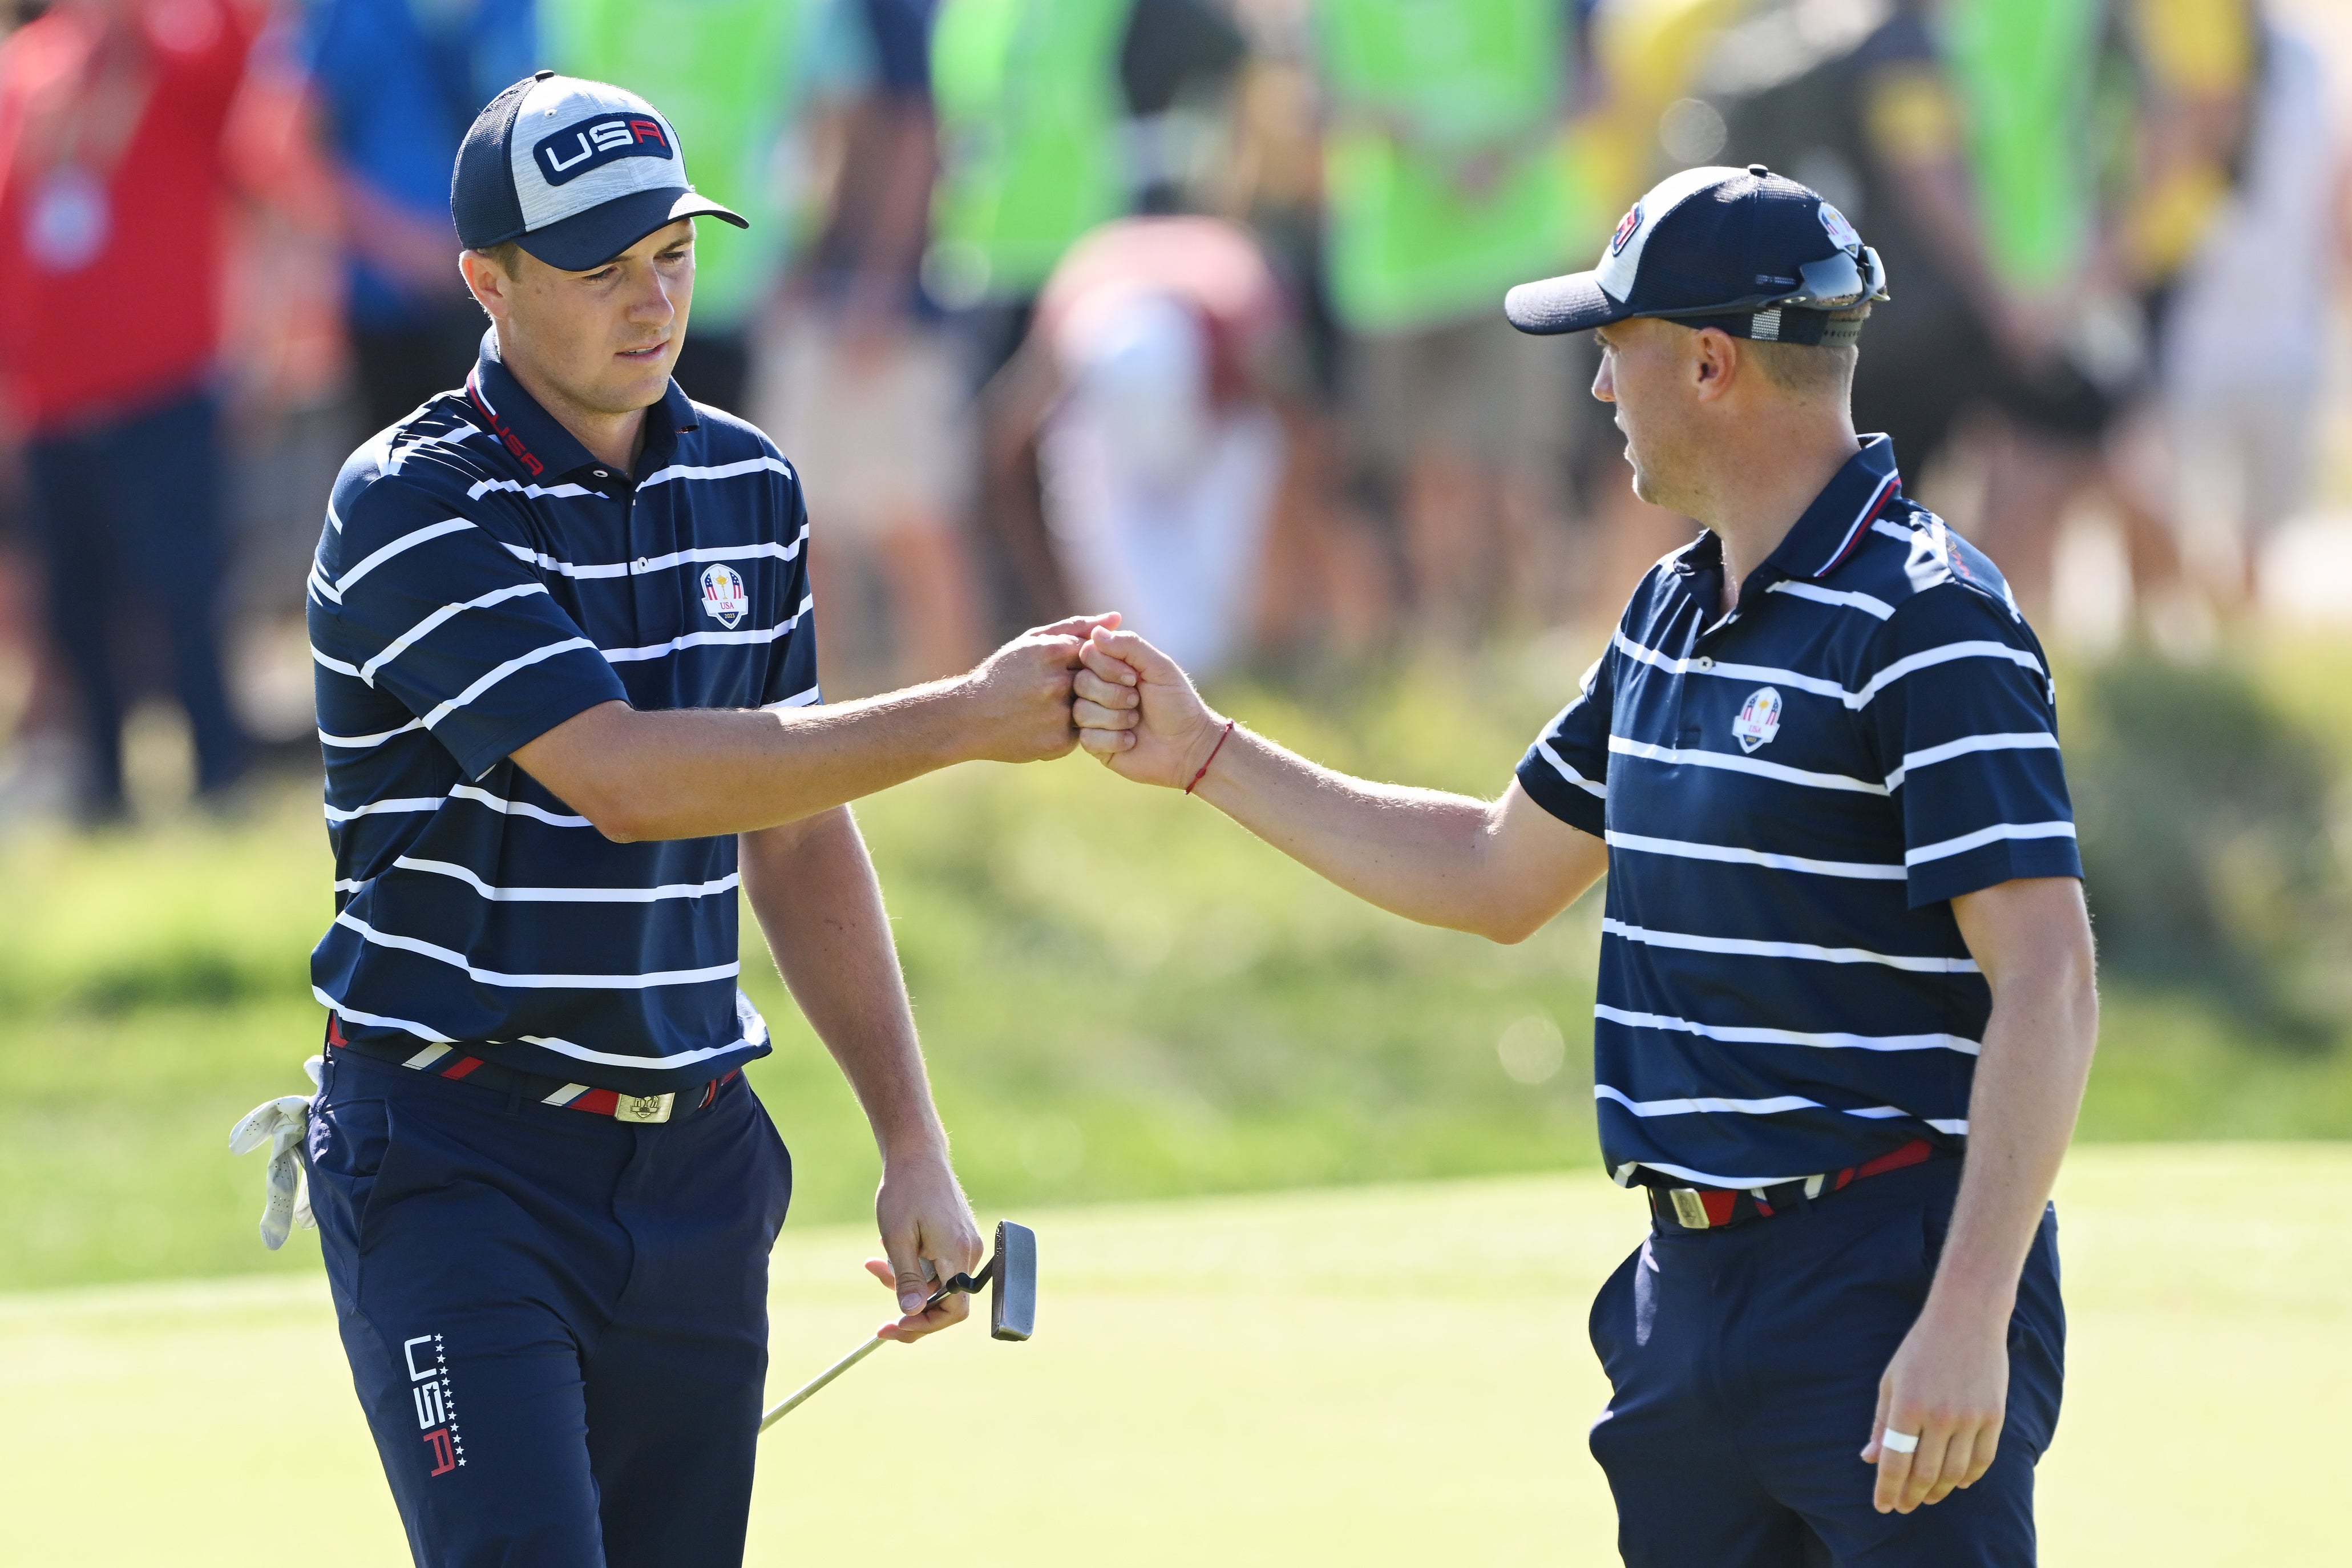 Jordan Spieth and Justin Thomas on the 11th hole at the Ryder Cup 2023